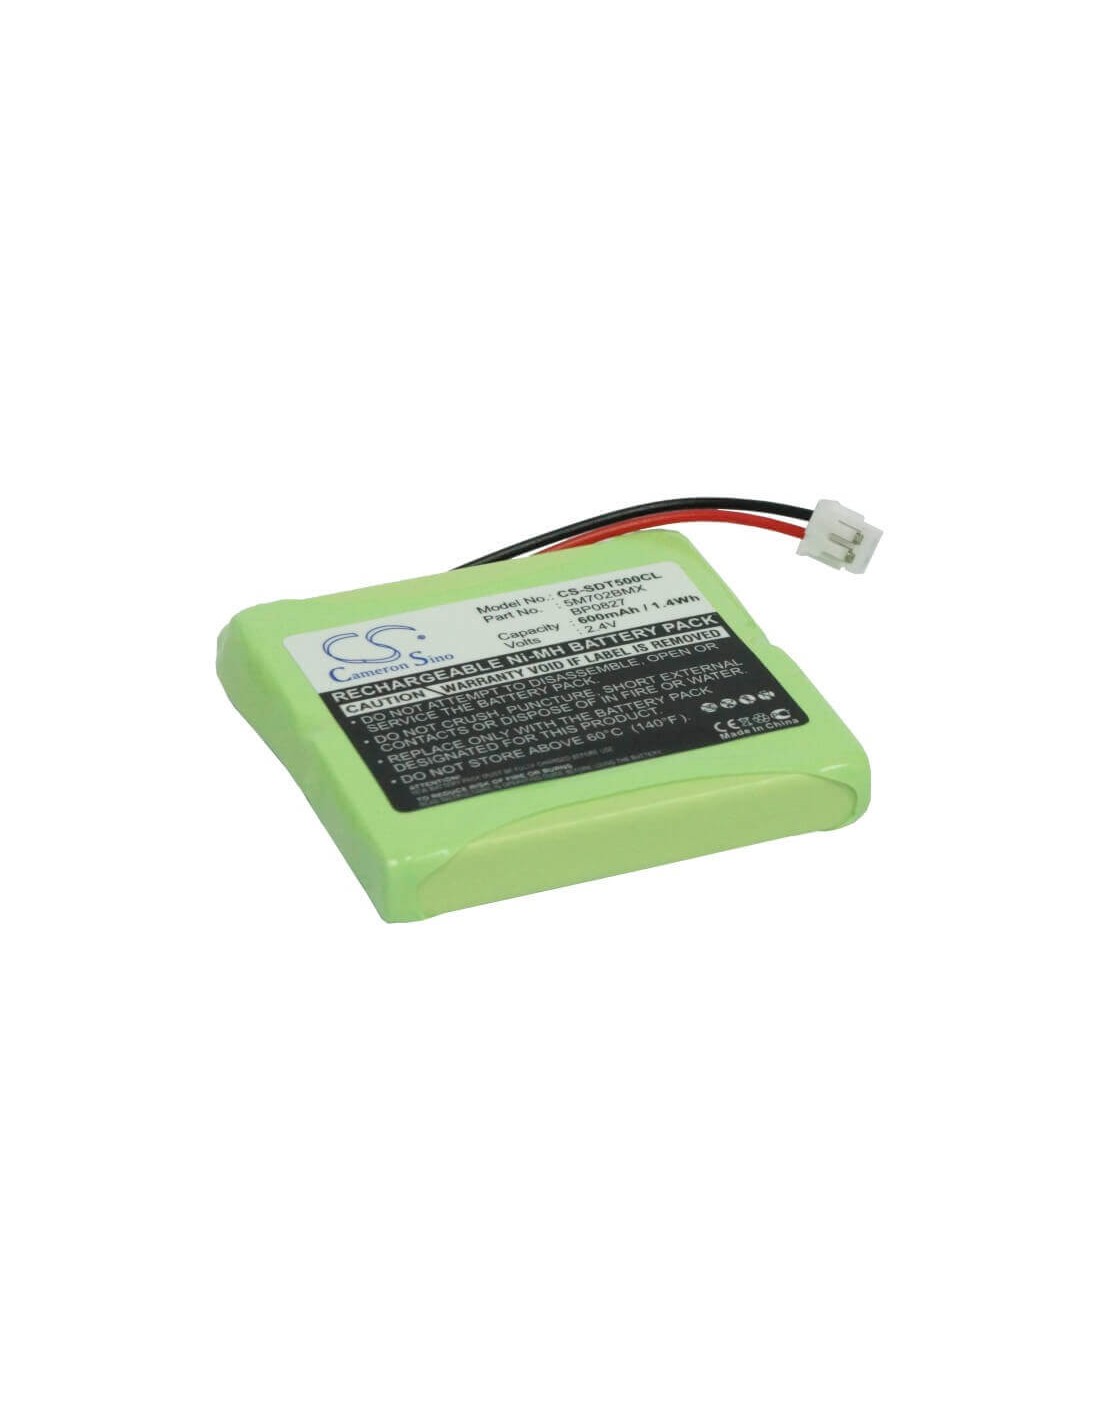 Battery for Telstra, 8400a, 8450, Cls-8450, Slim 2.4V, 600mAh - 1.44Wh